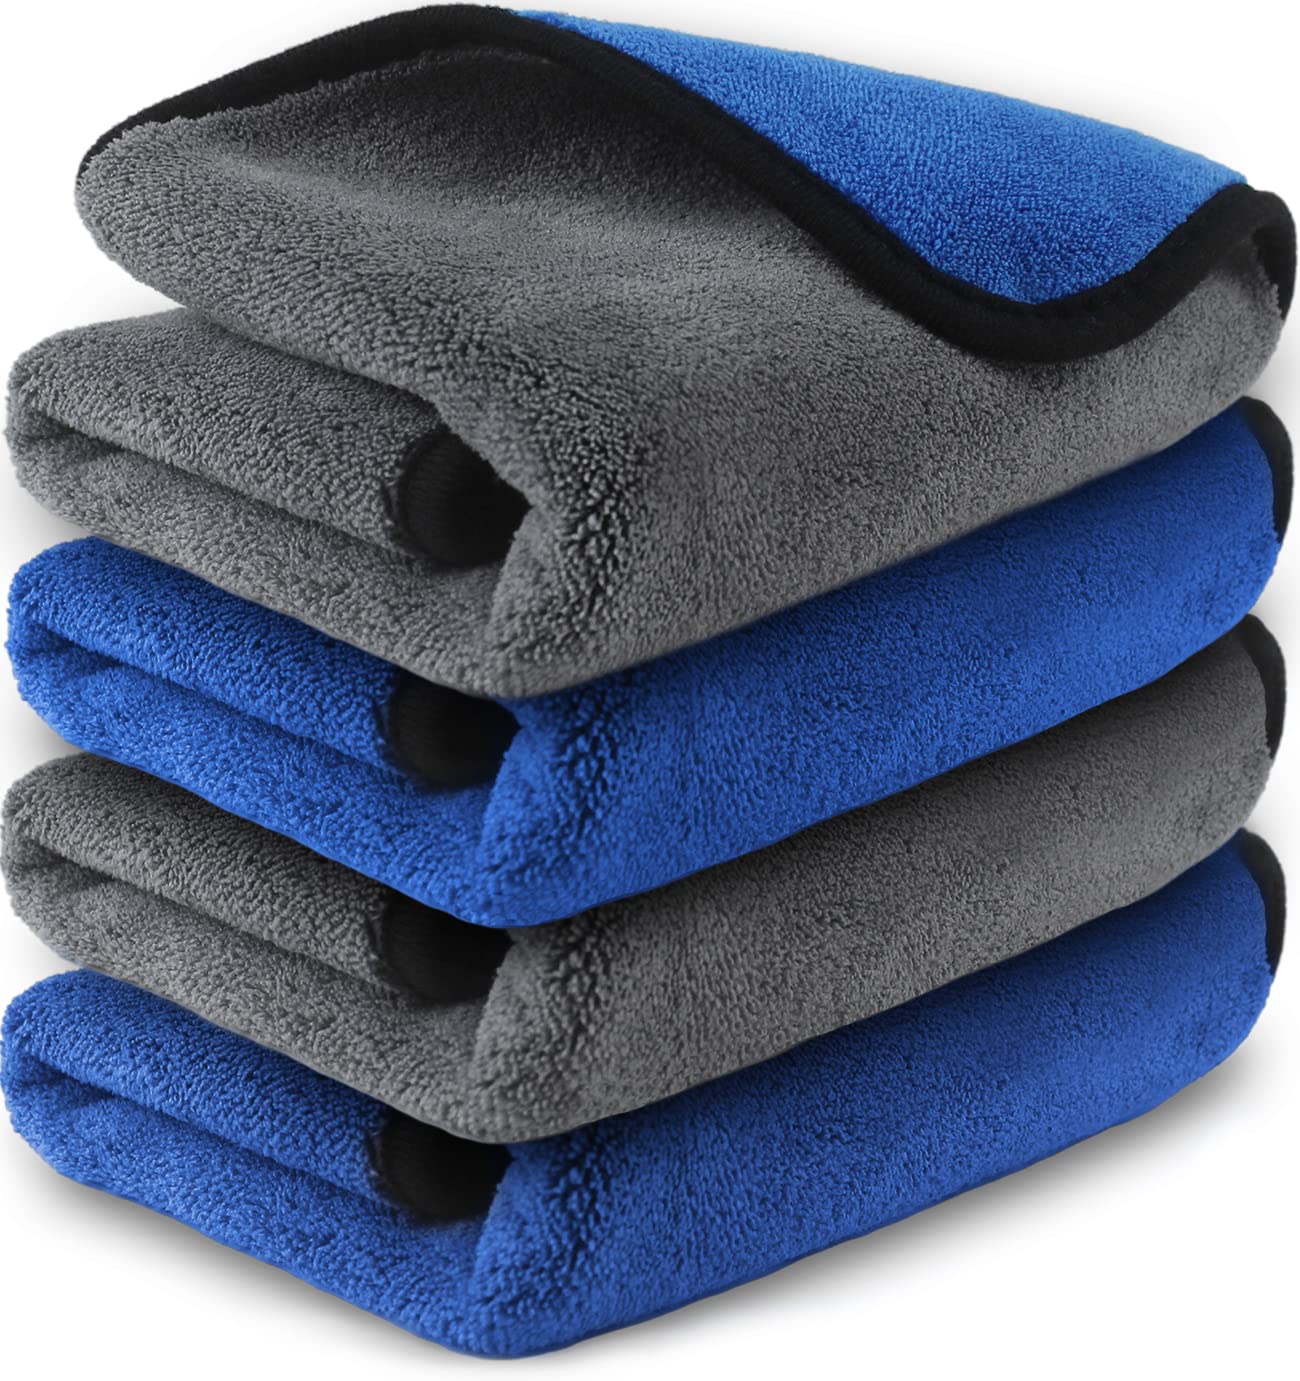 Airlab Microfiber Towels for cars Wash Drying 800gSM Thick Plush cleaning  cloth Auto Detailing Super Absorbent for Interior & Ex